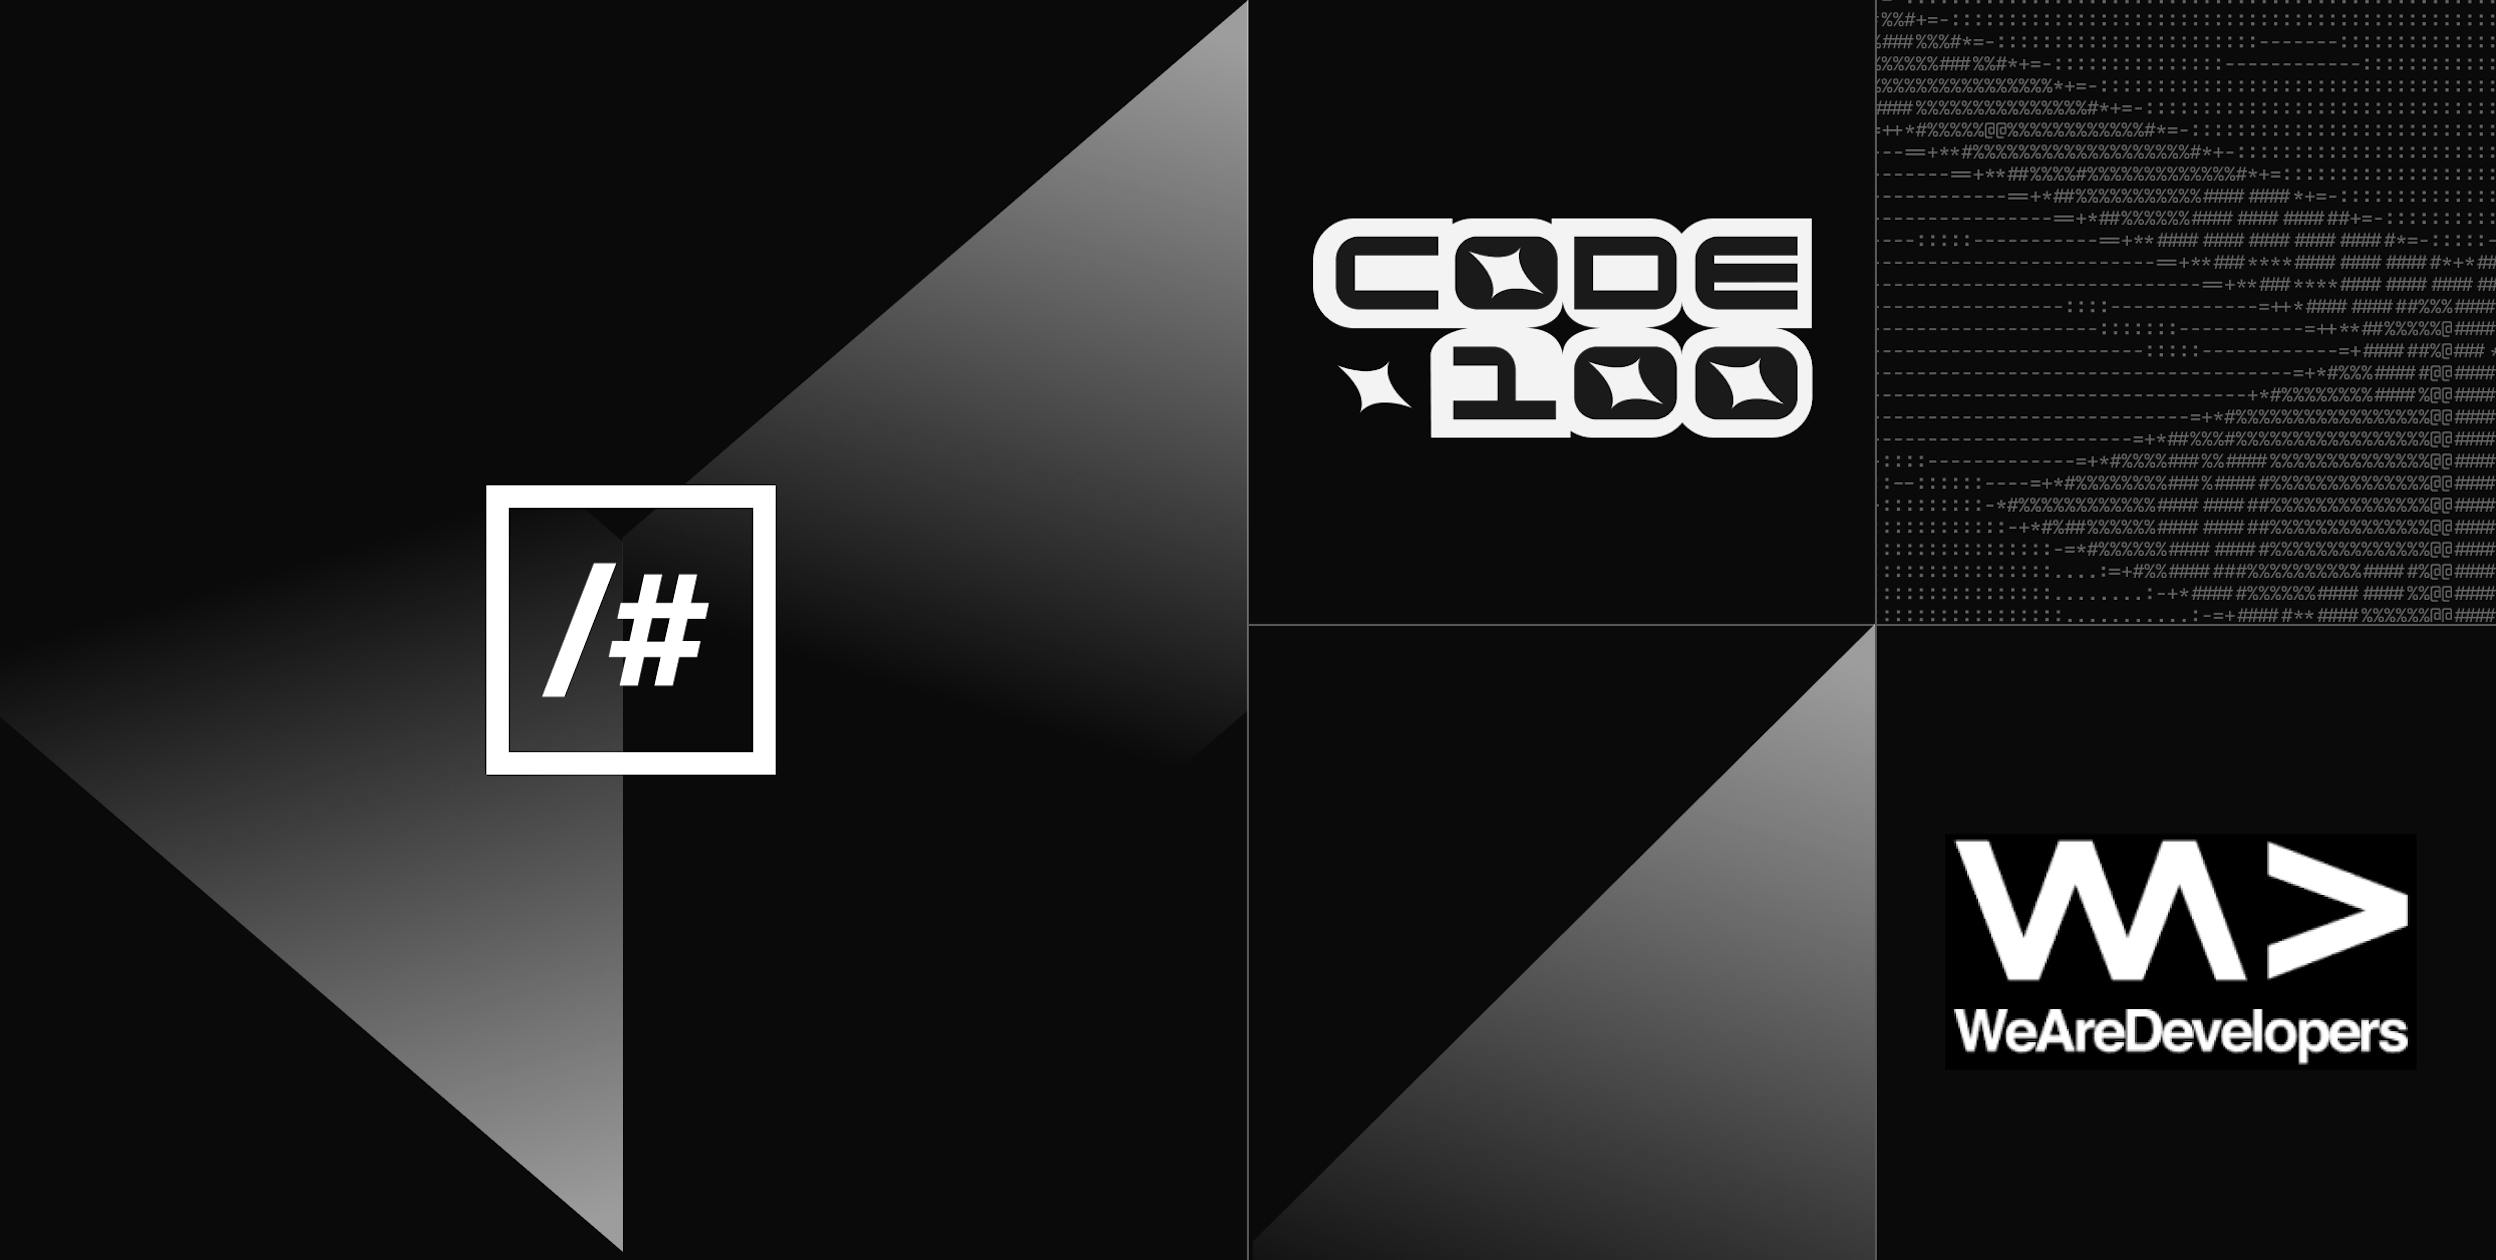 The Inside Story of CODE100